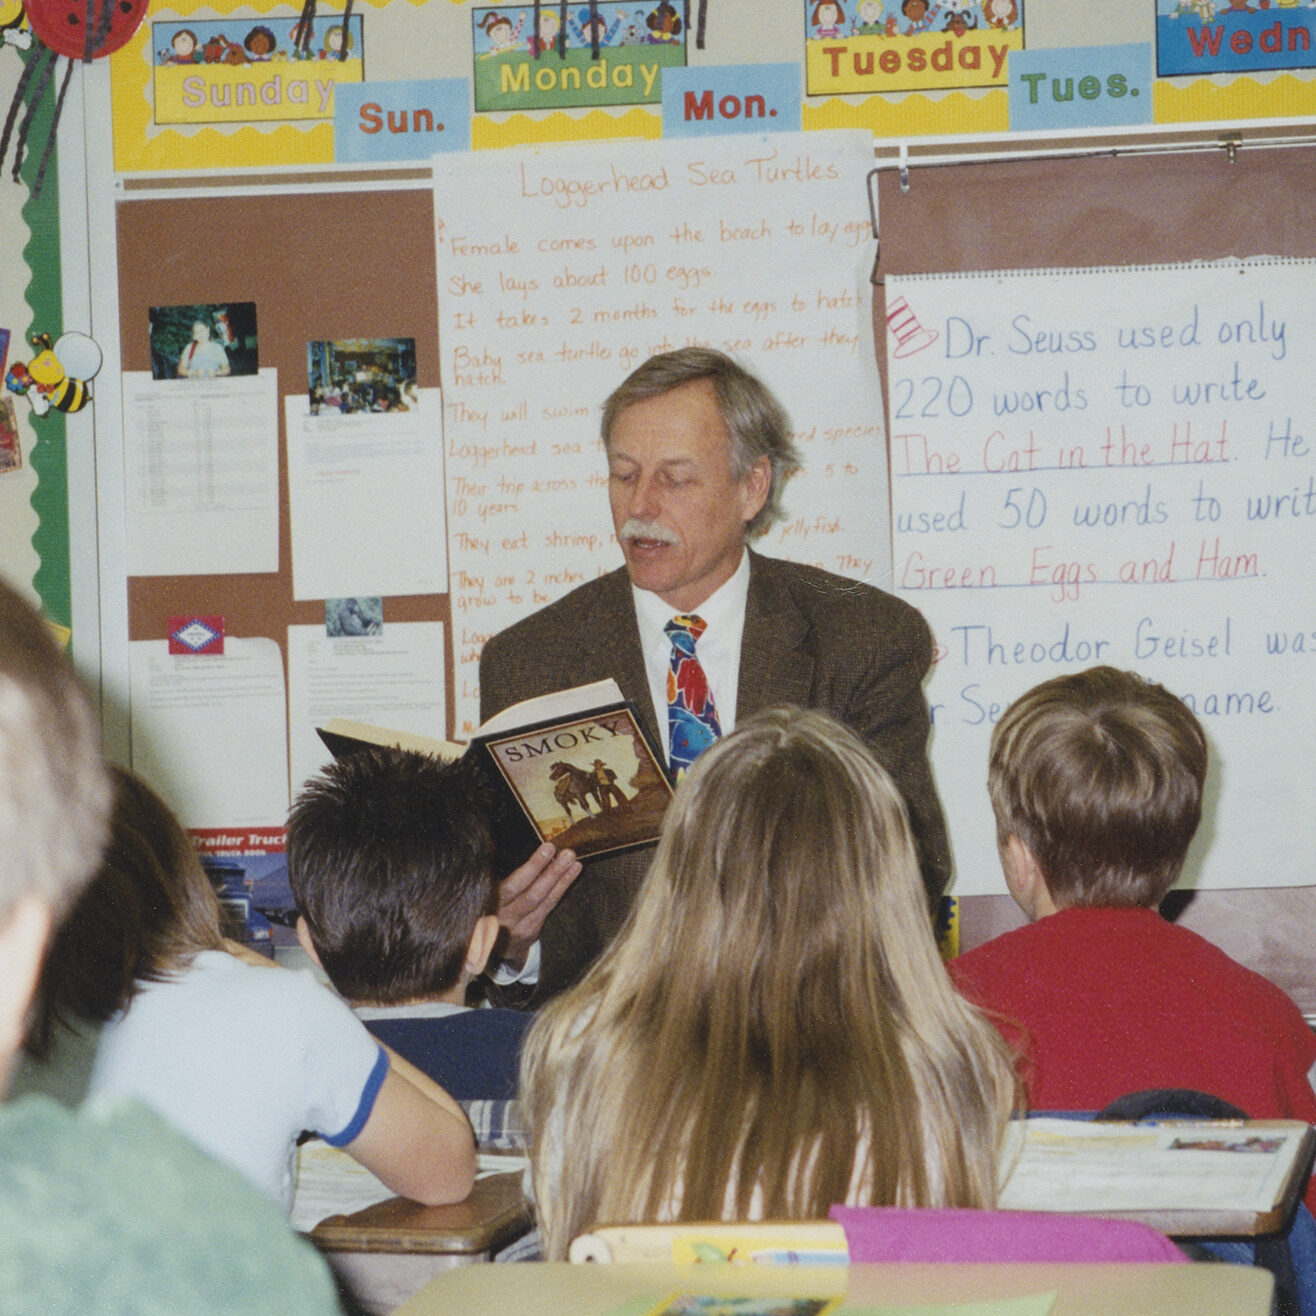 Color photograph of Snyder sitting at the front of a classroom and reading "Smoky the Cow Horse" to a group of students